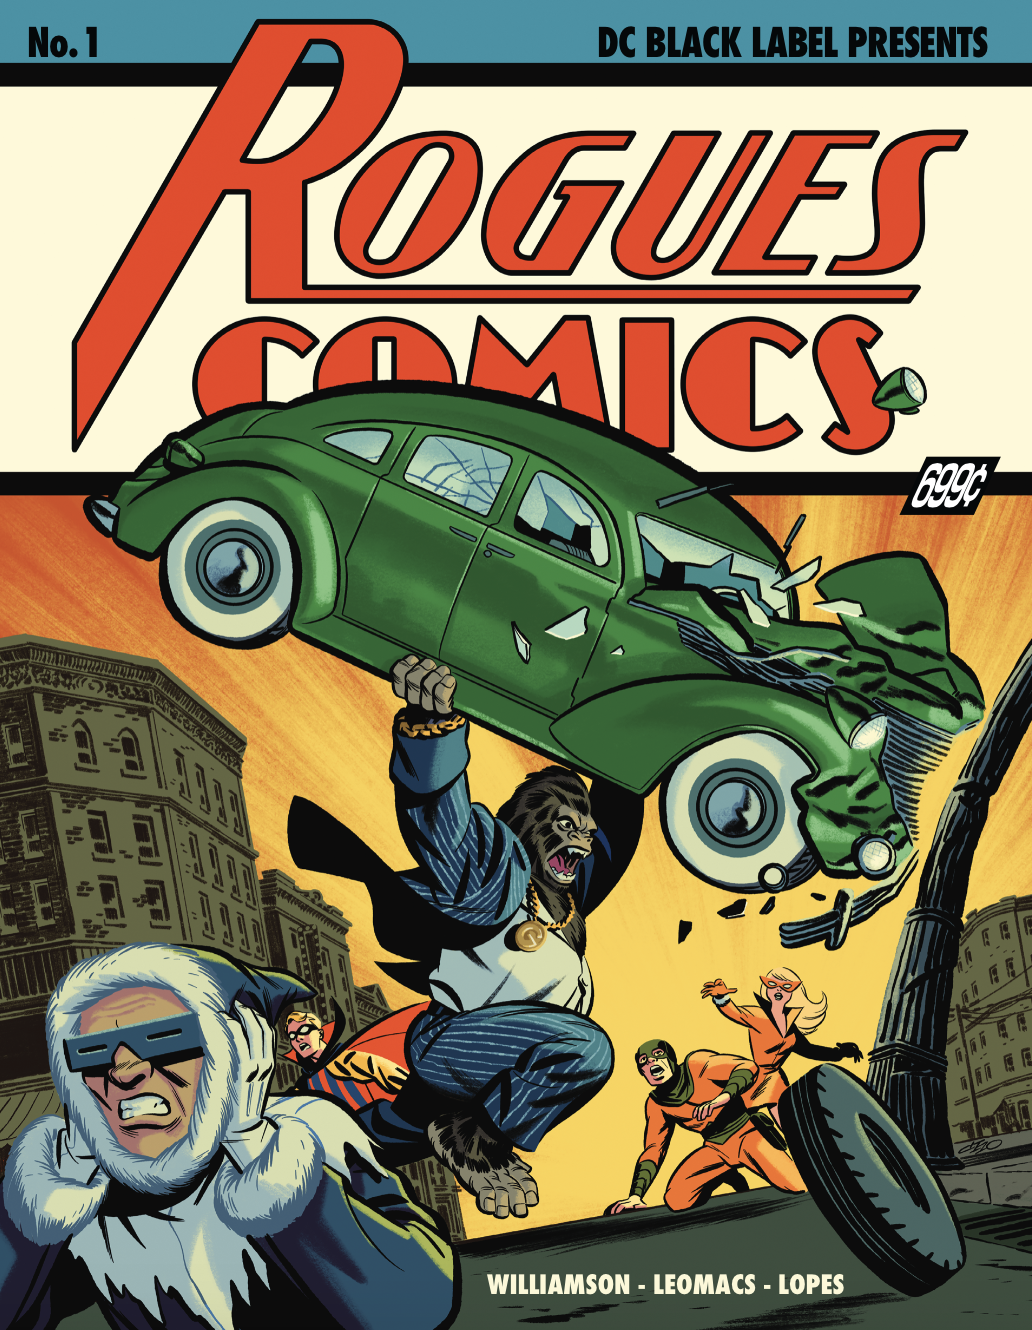 Rogues #1 Cover C Incentive 1 for 25 Michael Cho Variant (Mature) (Of 4)